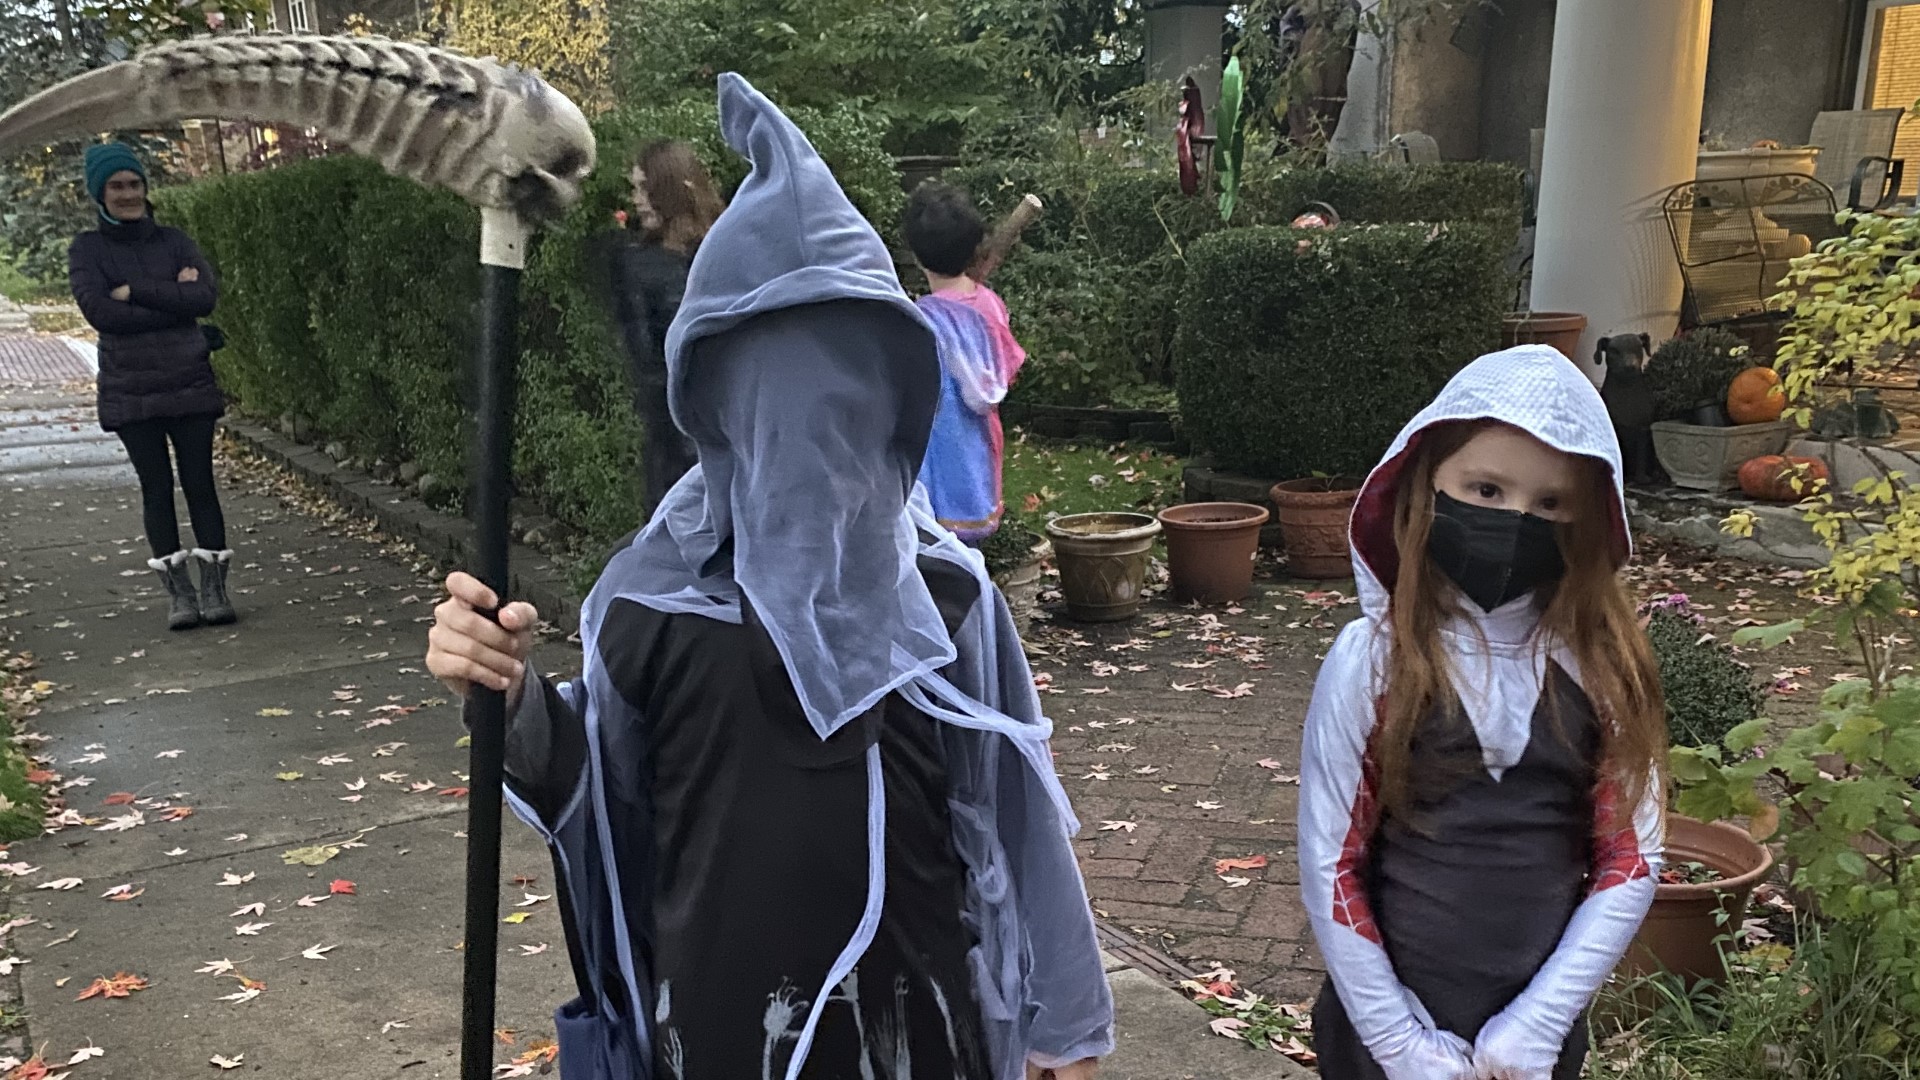 Trick-or-treaters ran around the region over the Halloween weekend.